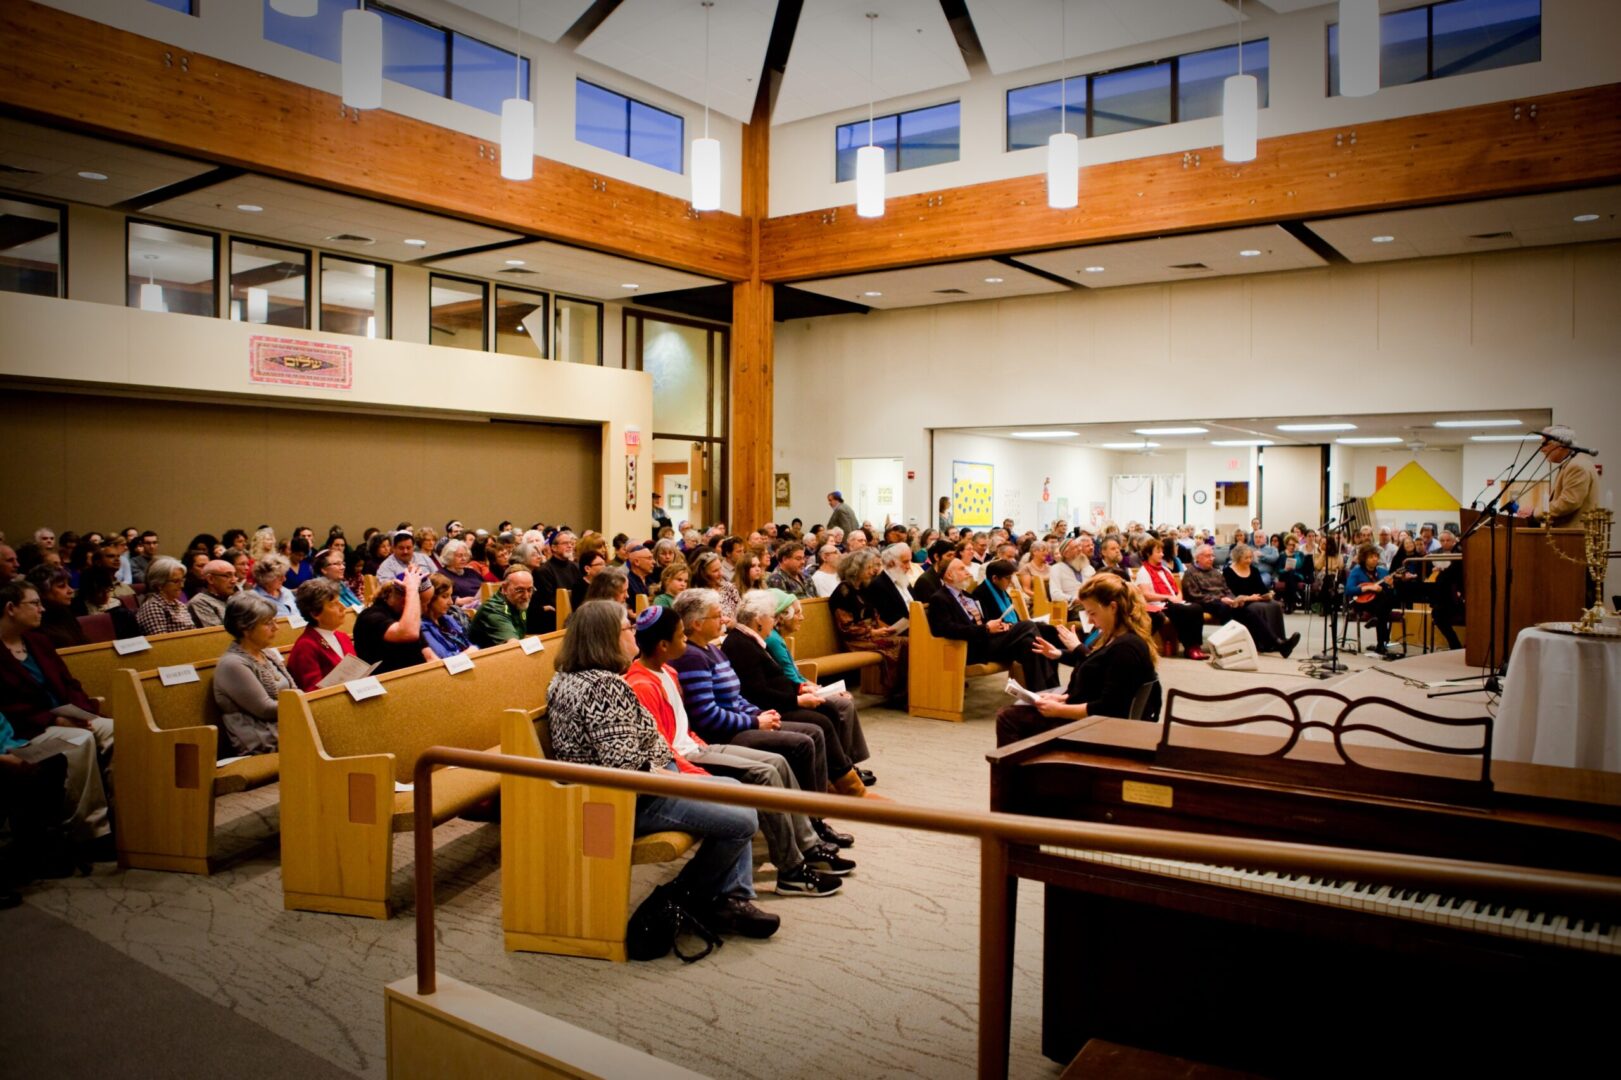 A large group of people sitting in church.